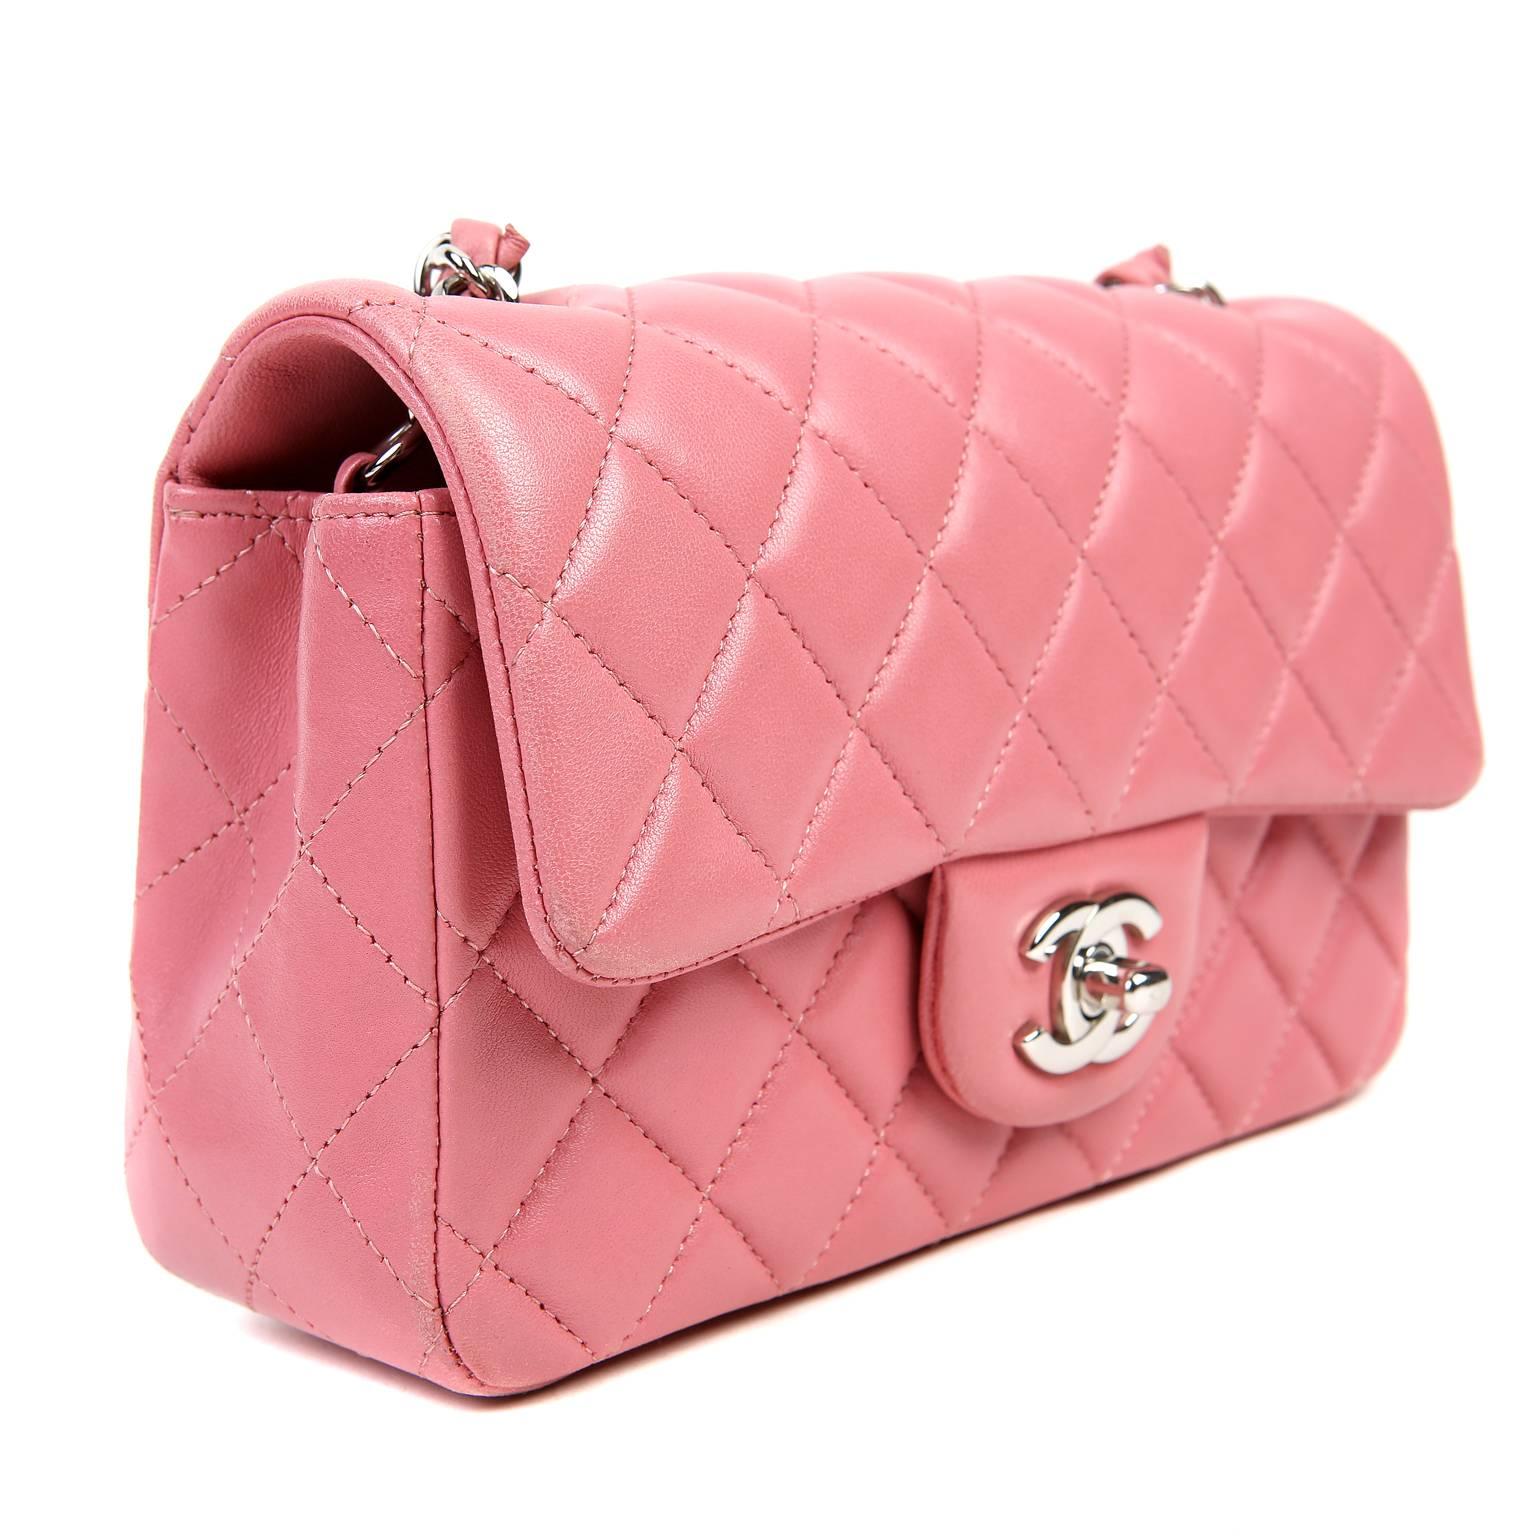 Chanel Pink Lambskin Mini Classic Flap SHW In Excellent Condition For Sale In Malibu, CA